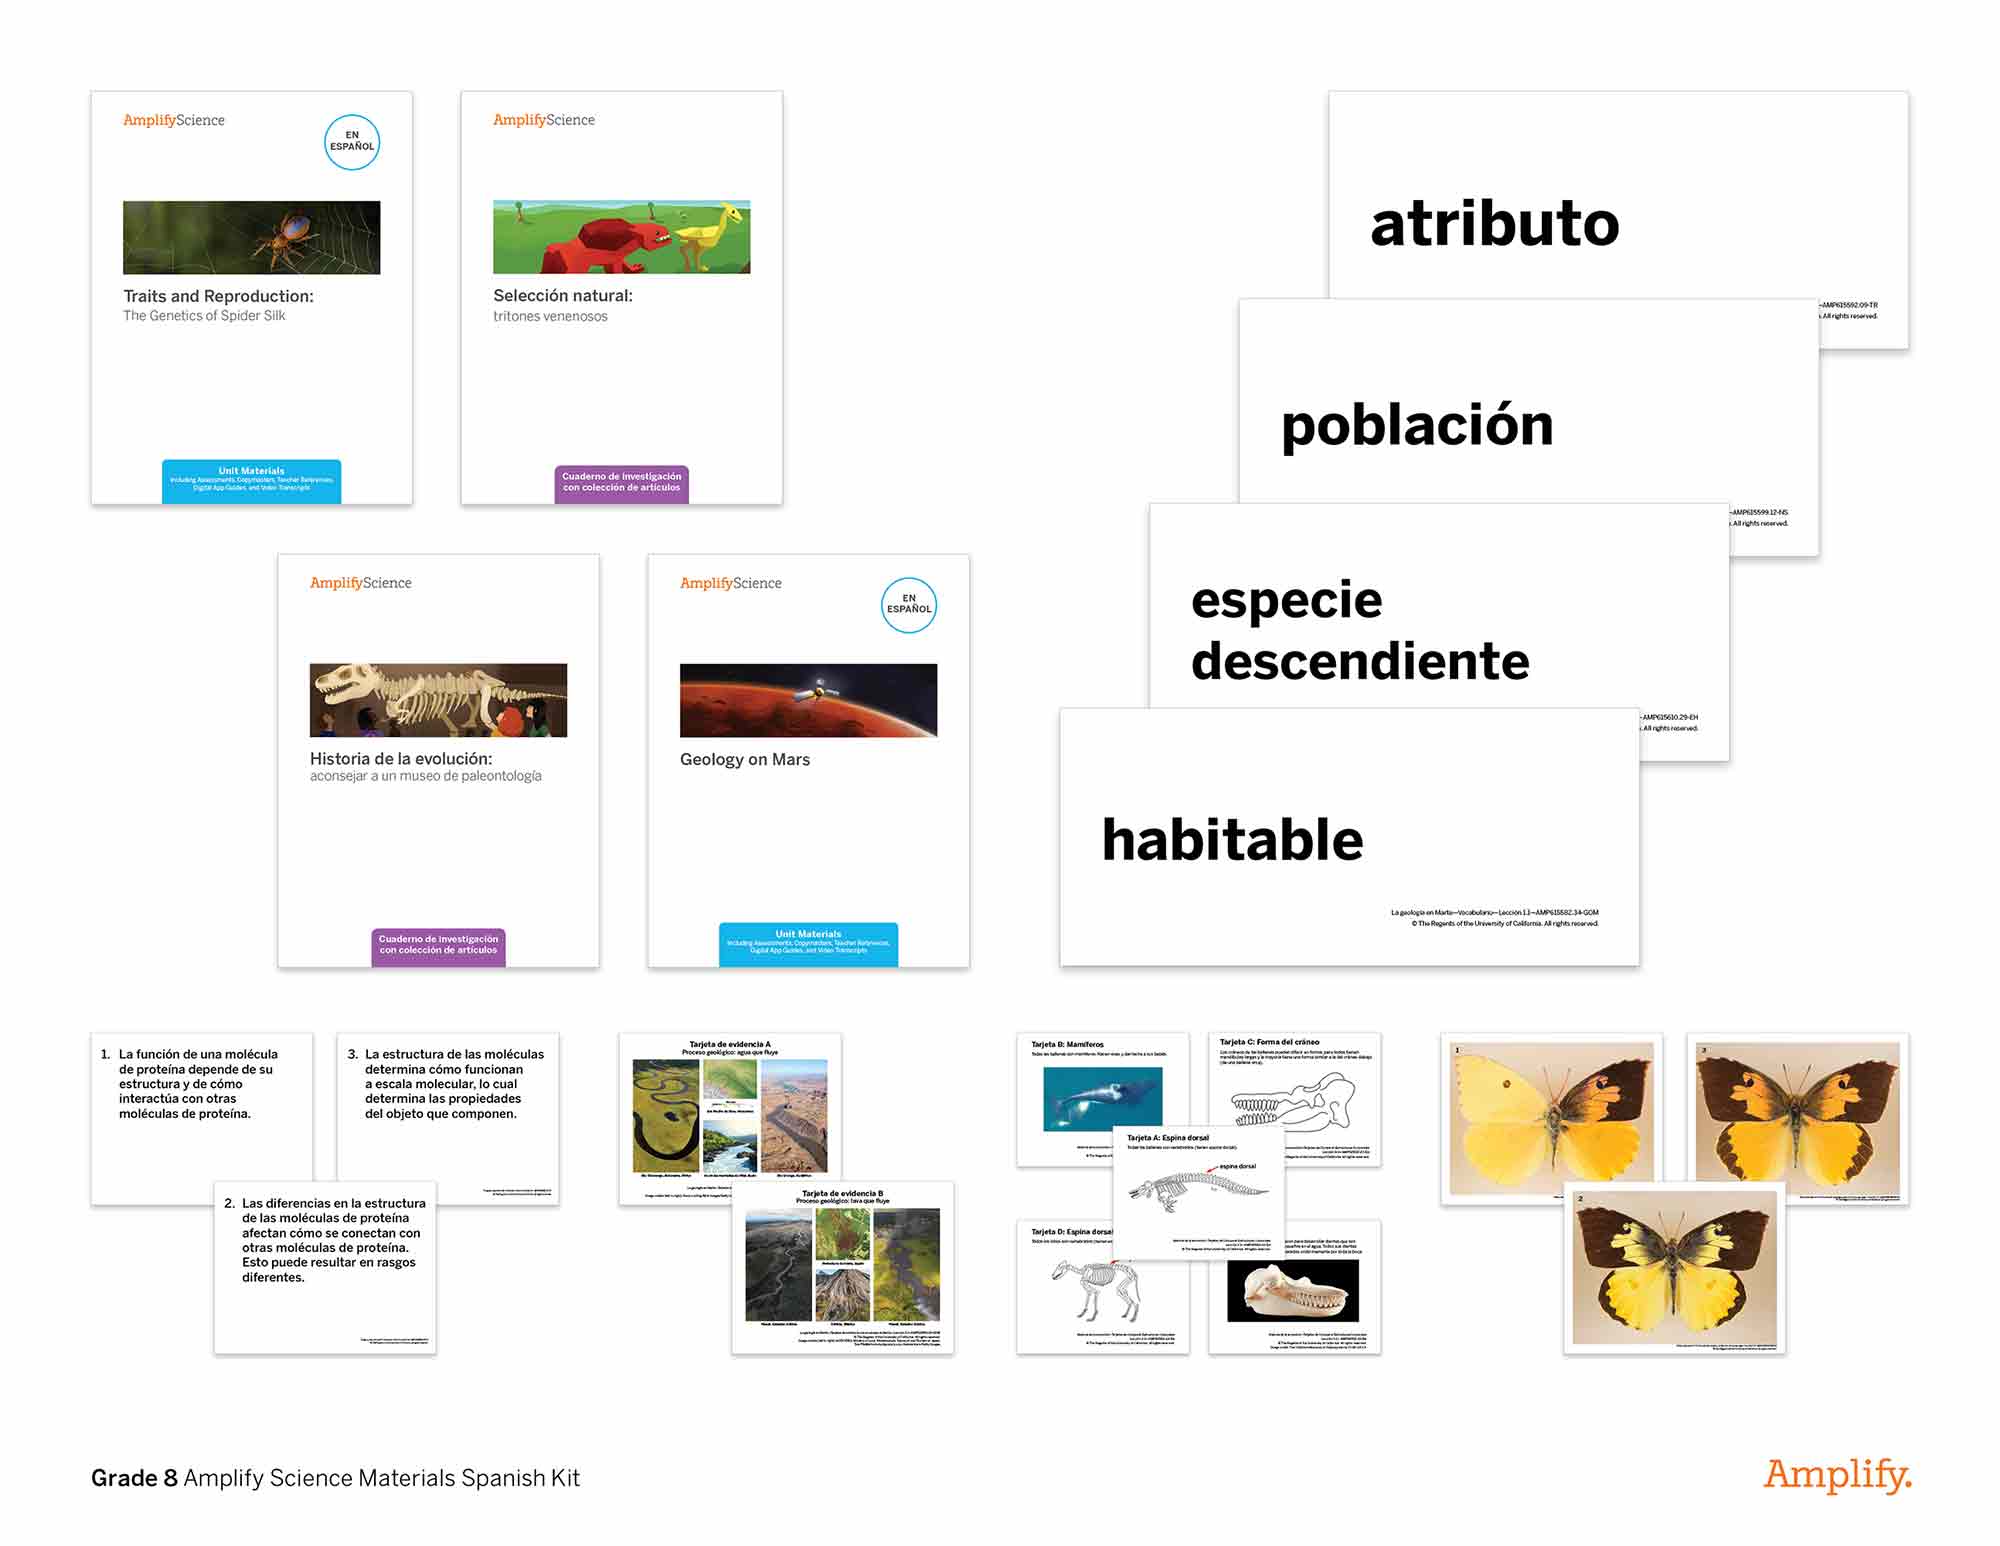 A visual array of educational materials from grade 8 amplify science spanish kit, featuring textbooks, worksheets, and illustrations related to biology and geology topics.